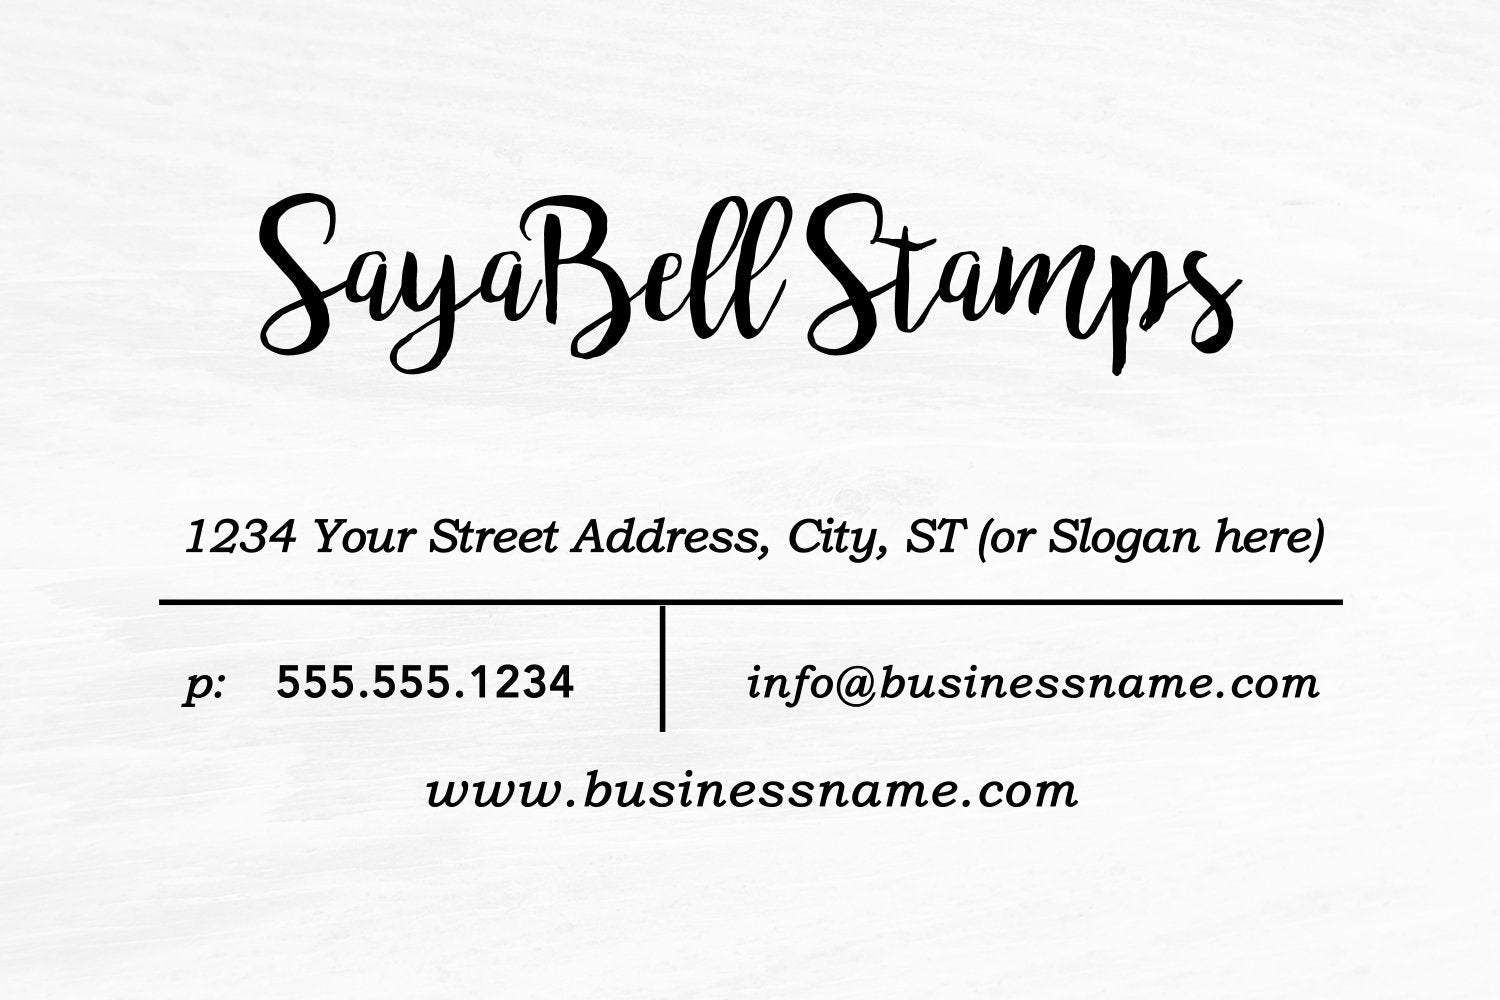 Business Card Stamp - Custom Business Card or Etsy Shop Stamp, Thank You Stamp, Custom Stamp by Sayabell Stamps. B8